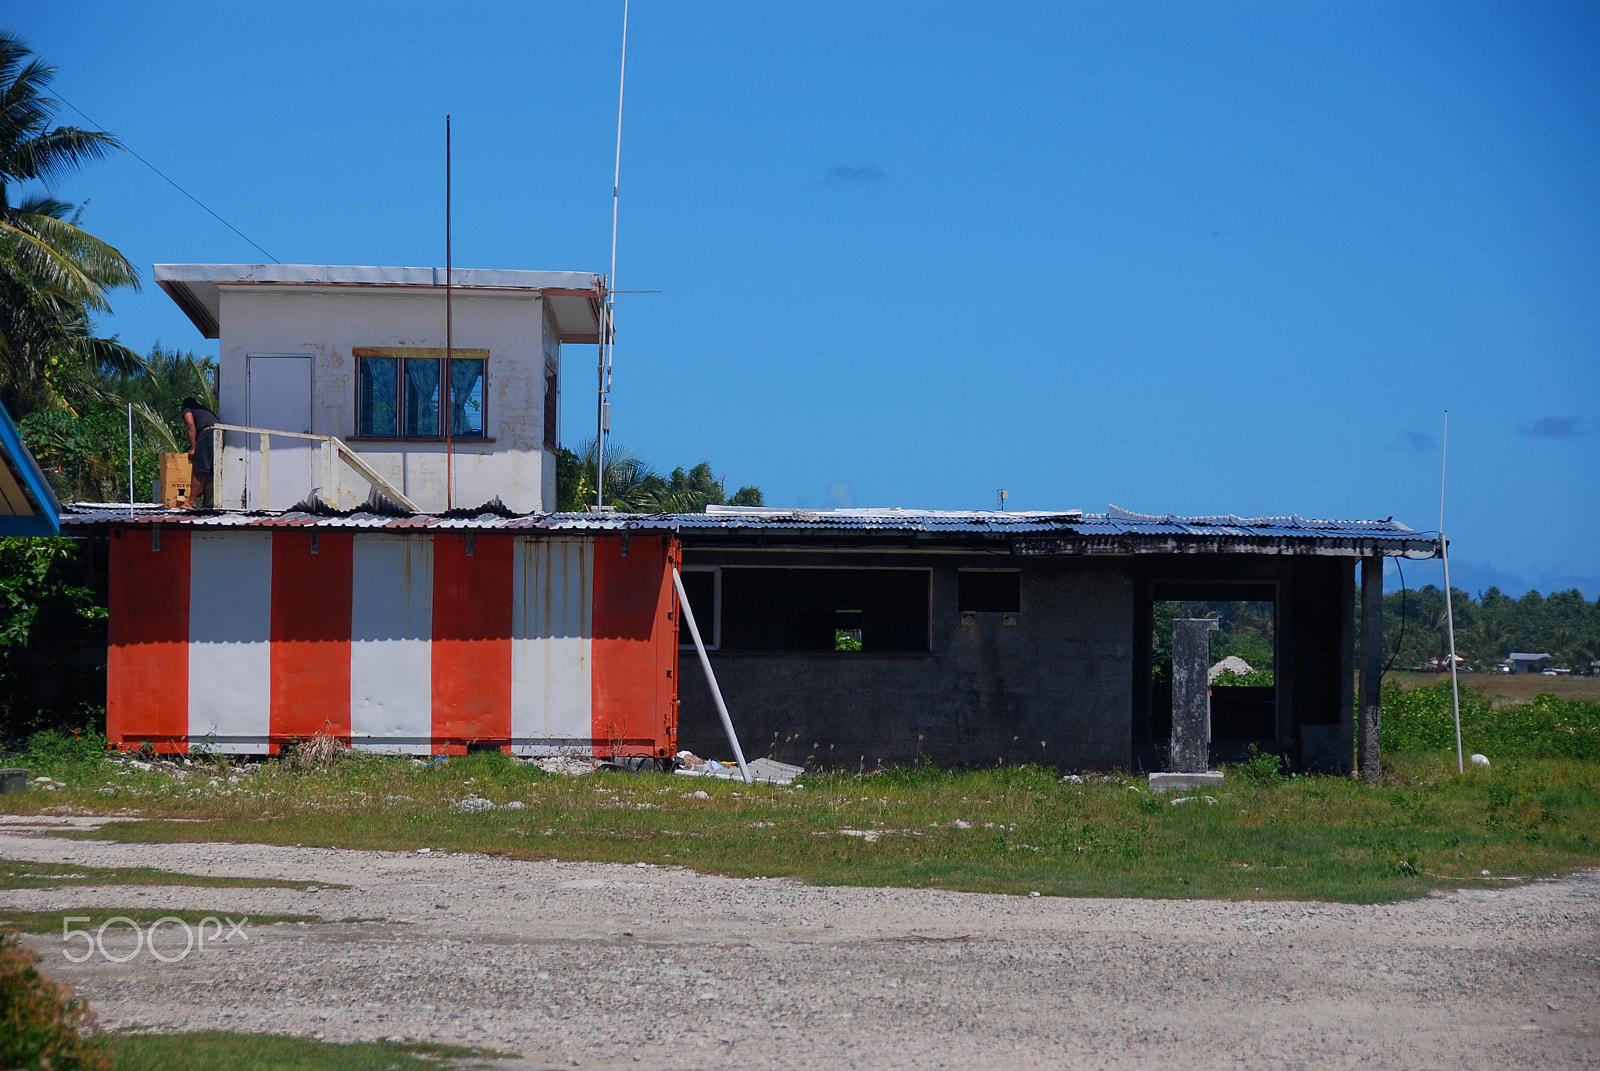 Nikon AF-S DX Nikkor 18-200mm F3.5-5.6G IF-ED VR sample photo. Funafuti airport control tower photography